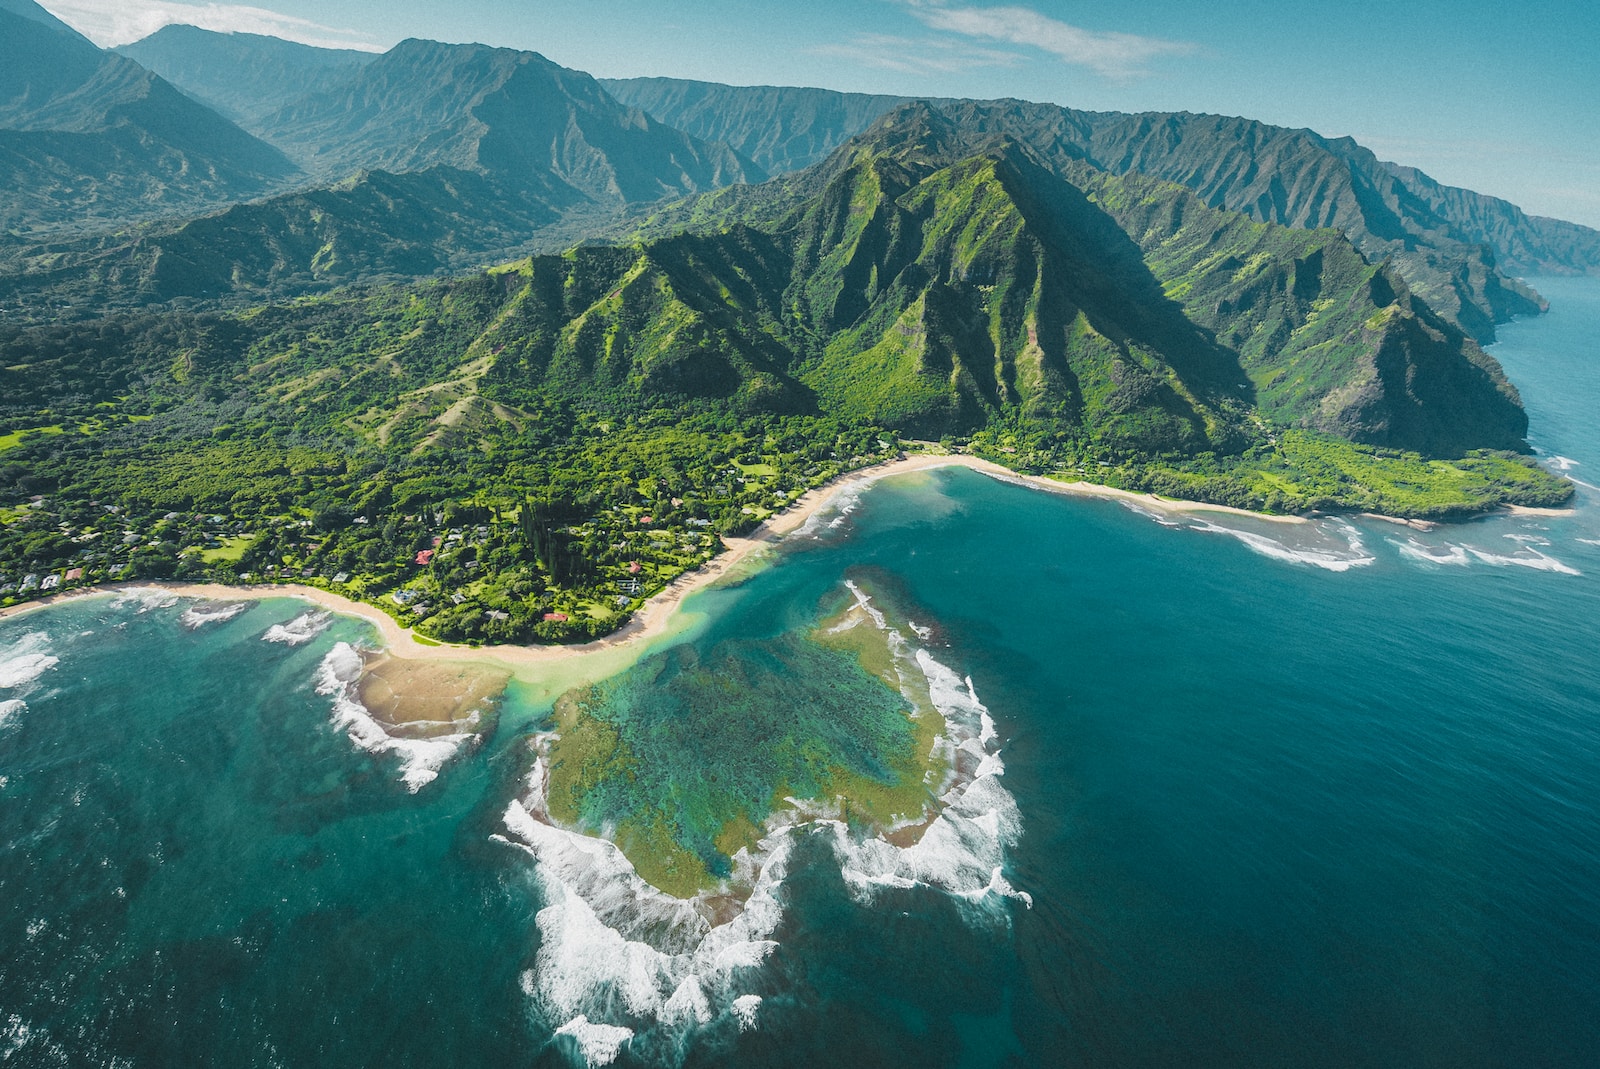 Hawaii five o, aerial view of green and brown mountains and lake